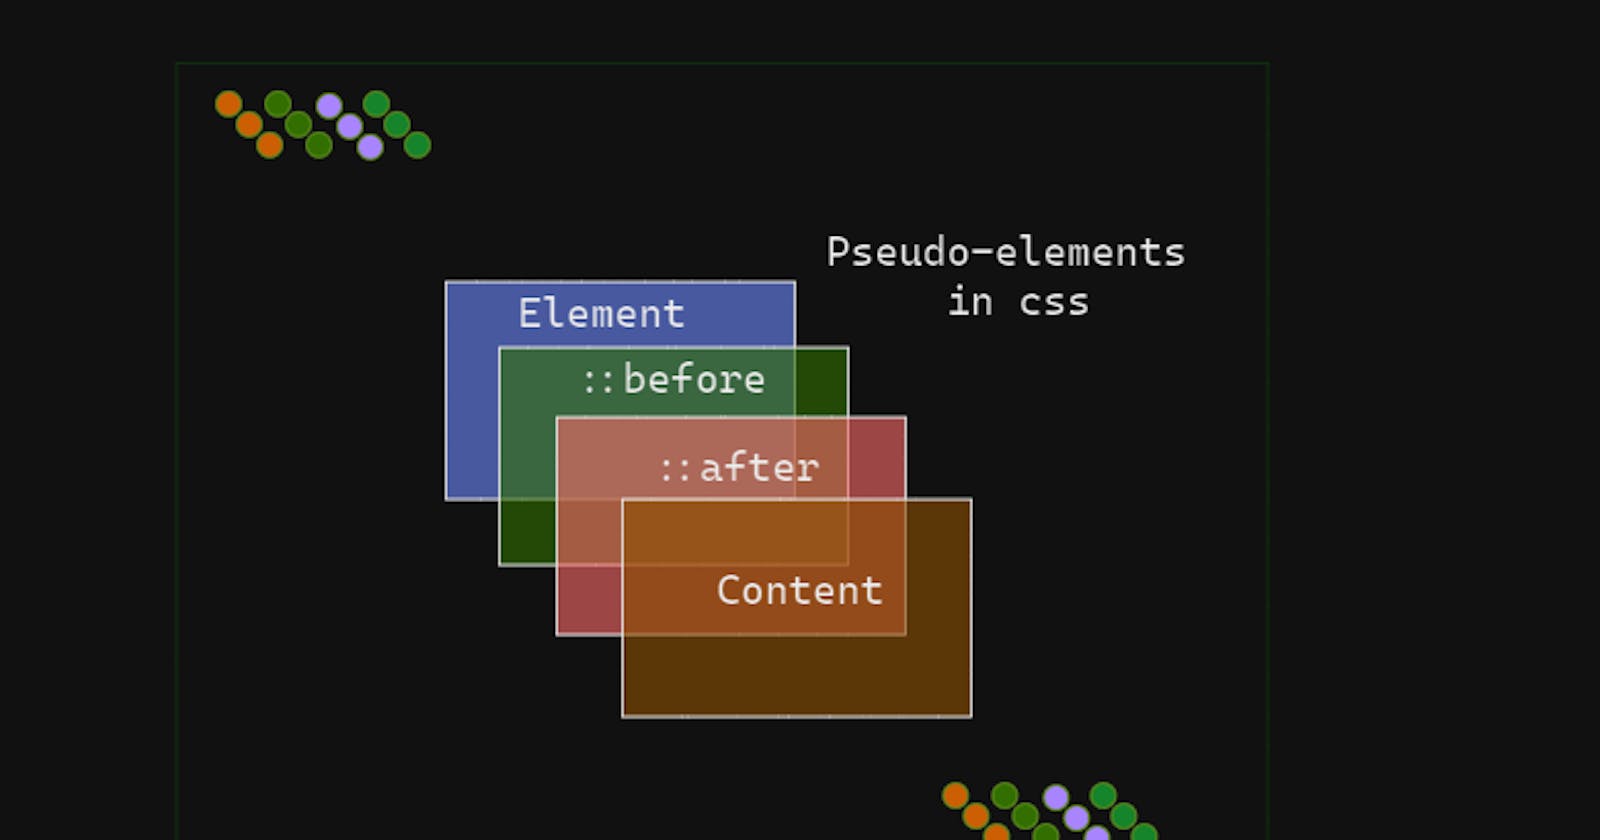 Pseudo-elements in css